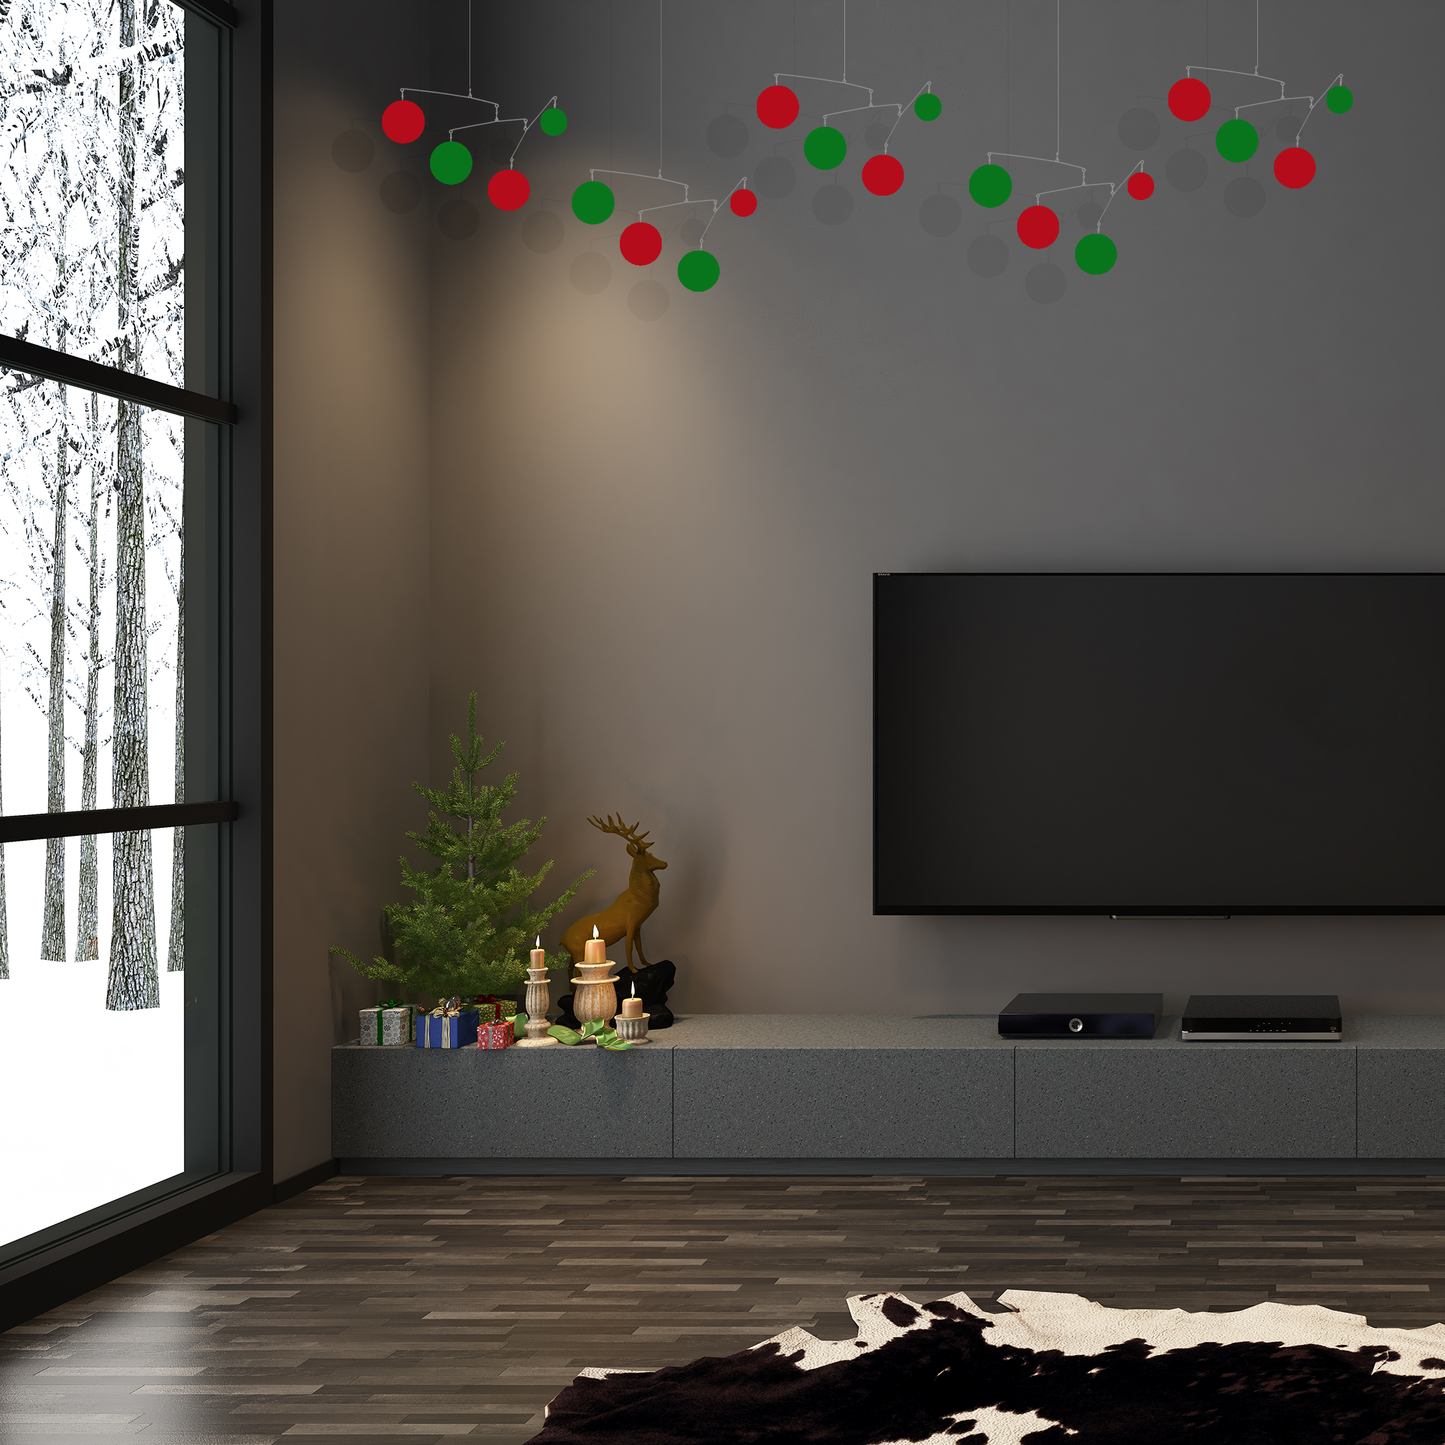 4 beautiful red and green hanging art mobiles in dark gray room with Christmas decorations and large TV with snow outside - mobiles by AtomicMobiles.com